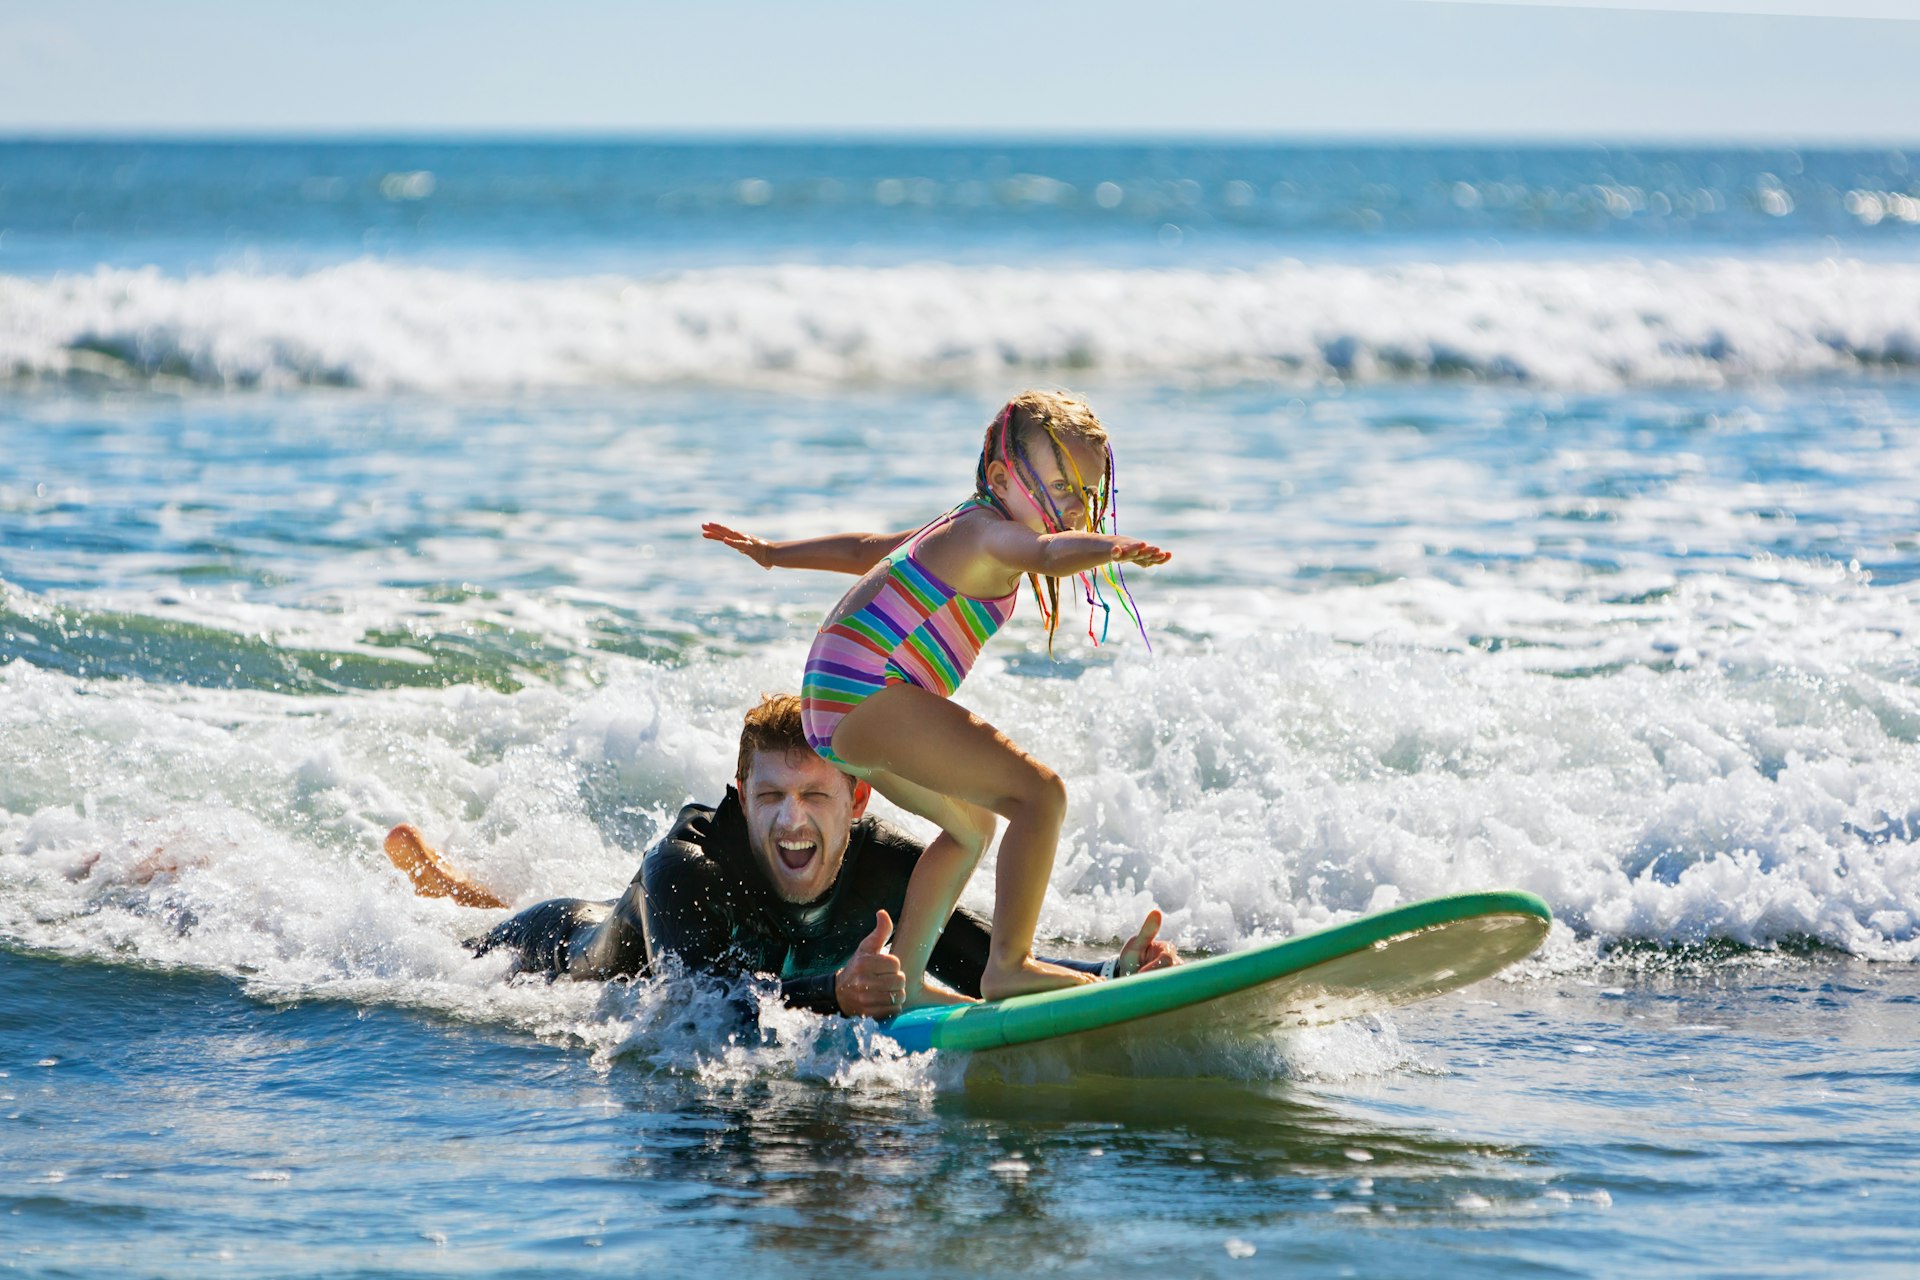 A man in a wet suit lies in the surf giving a thumbs-up signal as a young child balances on a surf board 